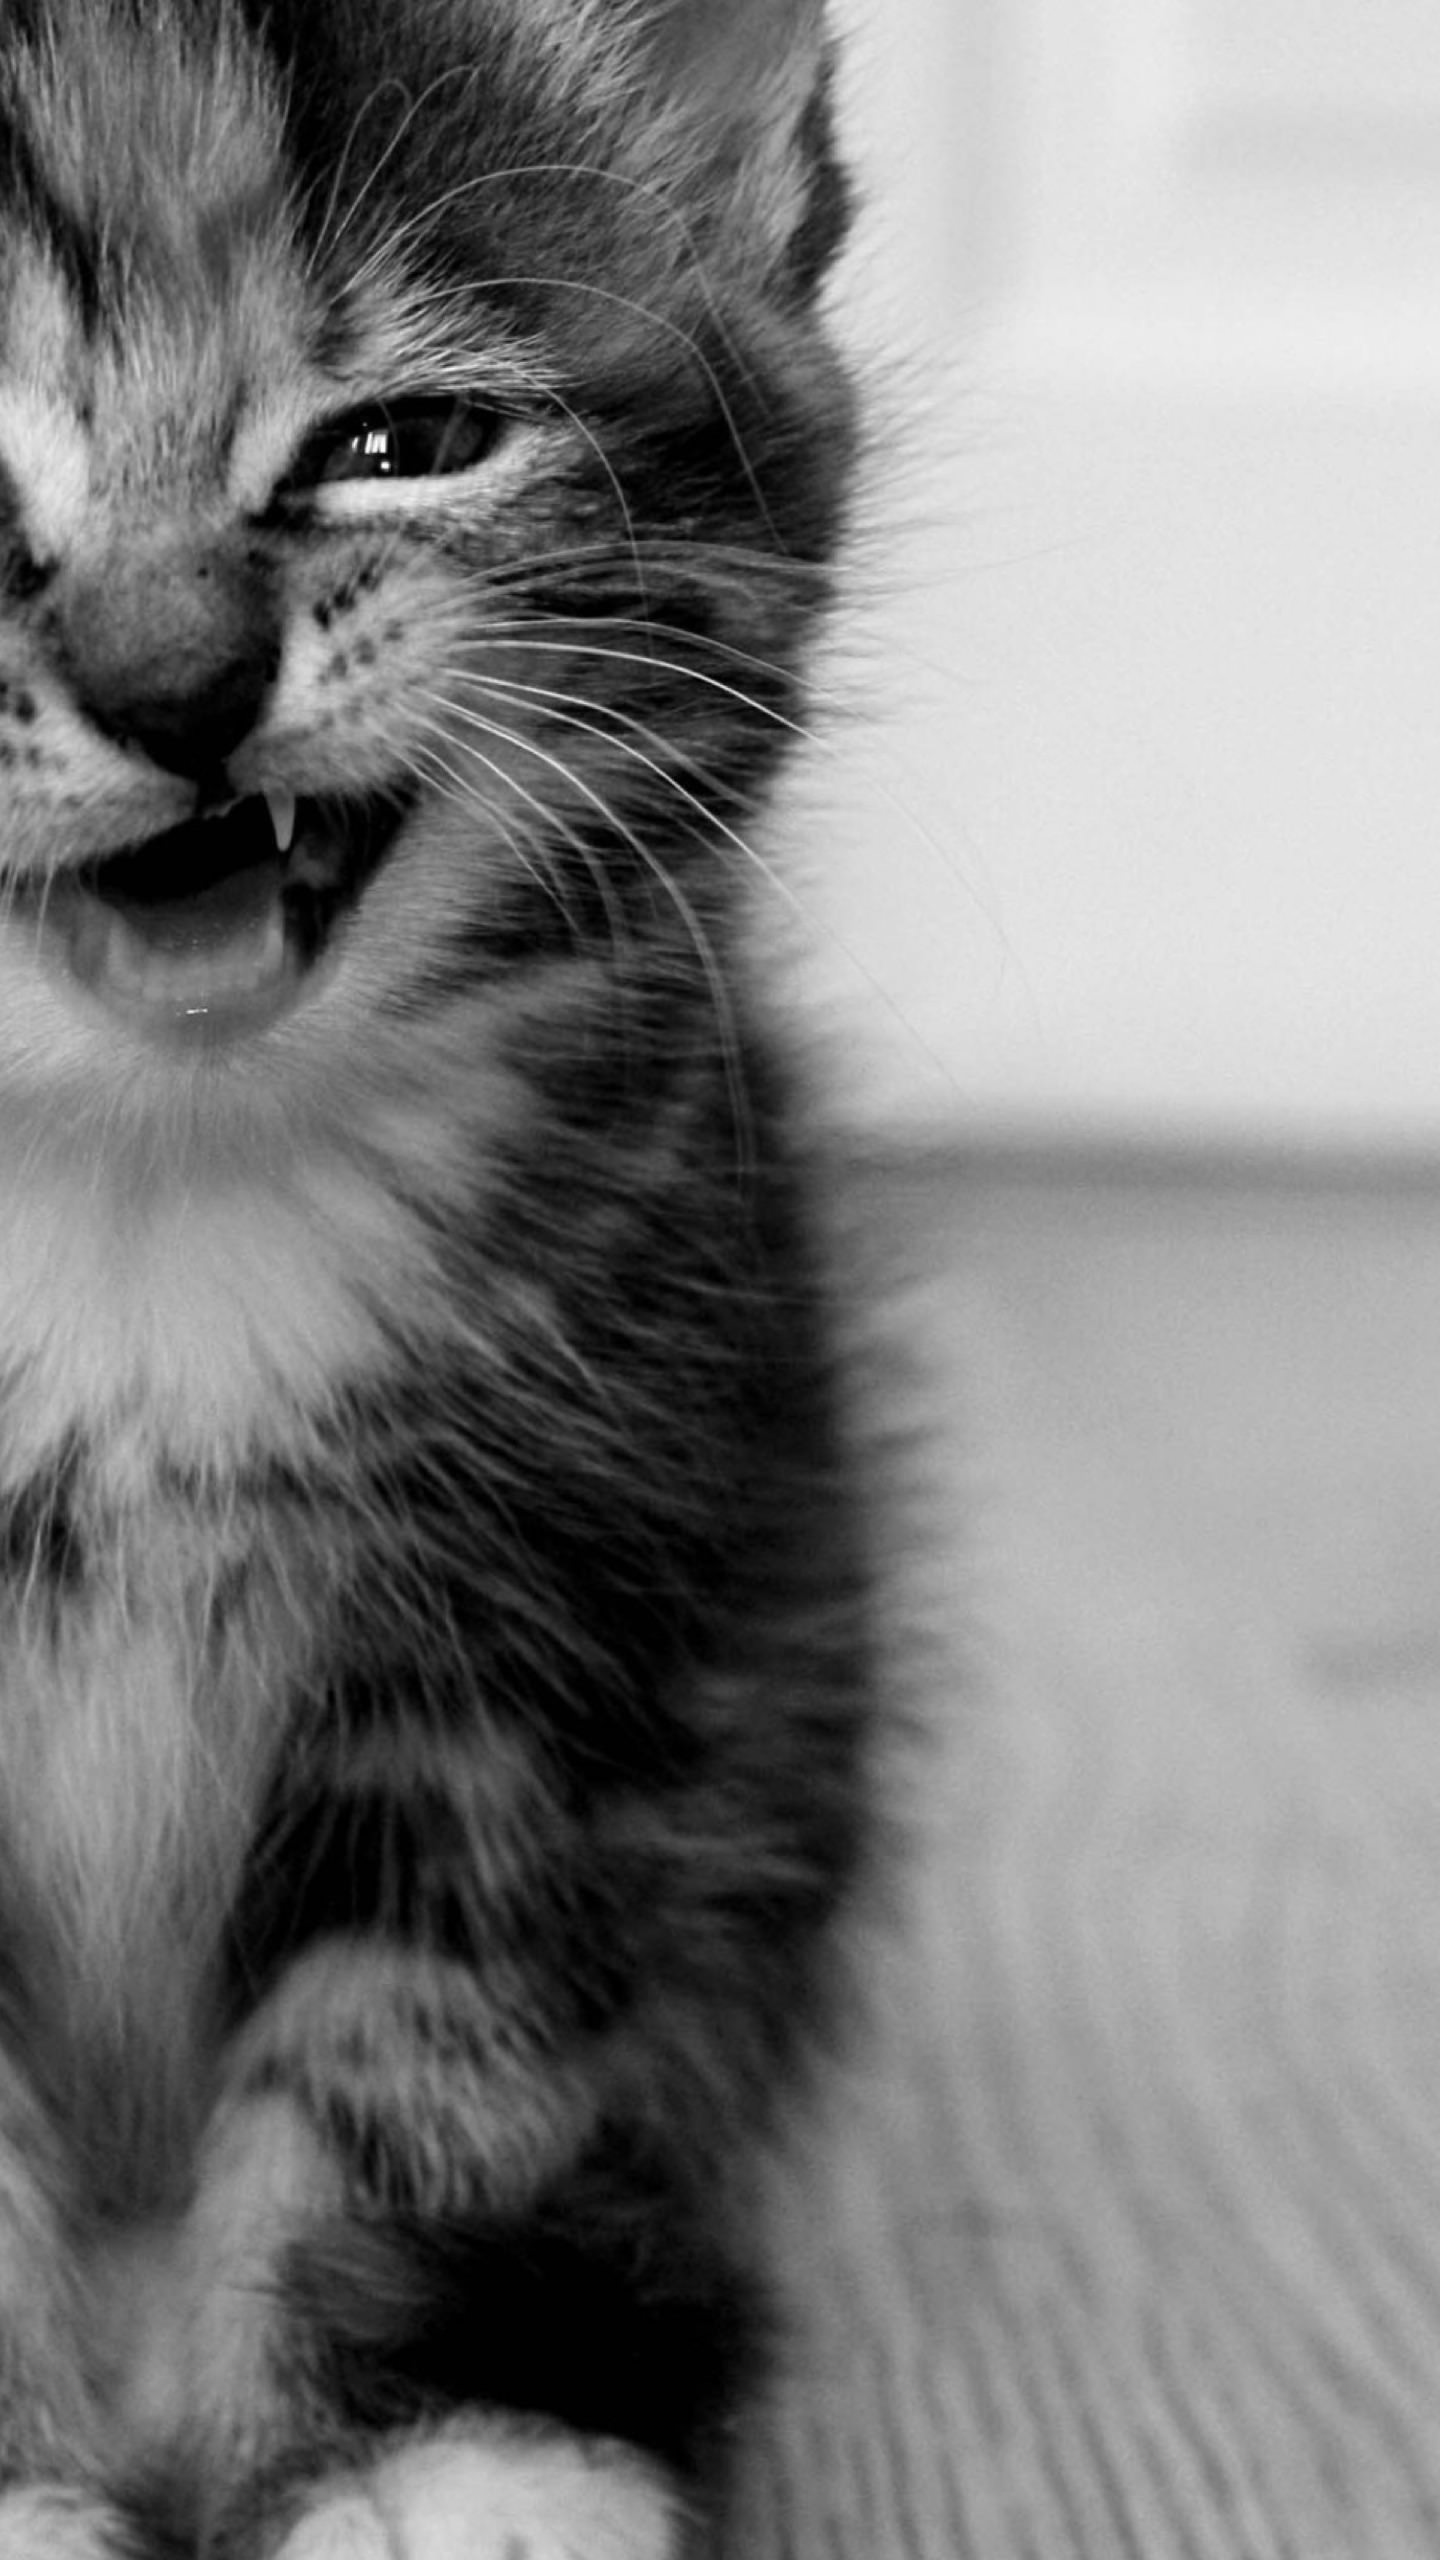 Wallpaper Kucing Hd Android Image Num 1